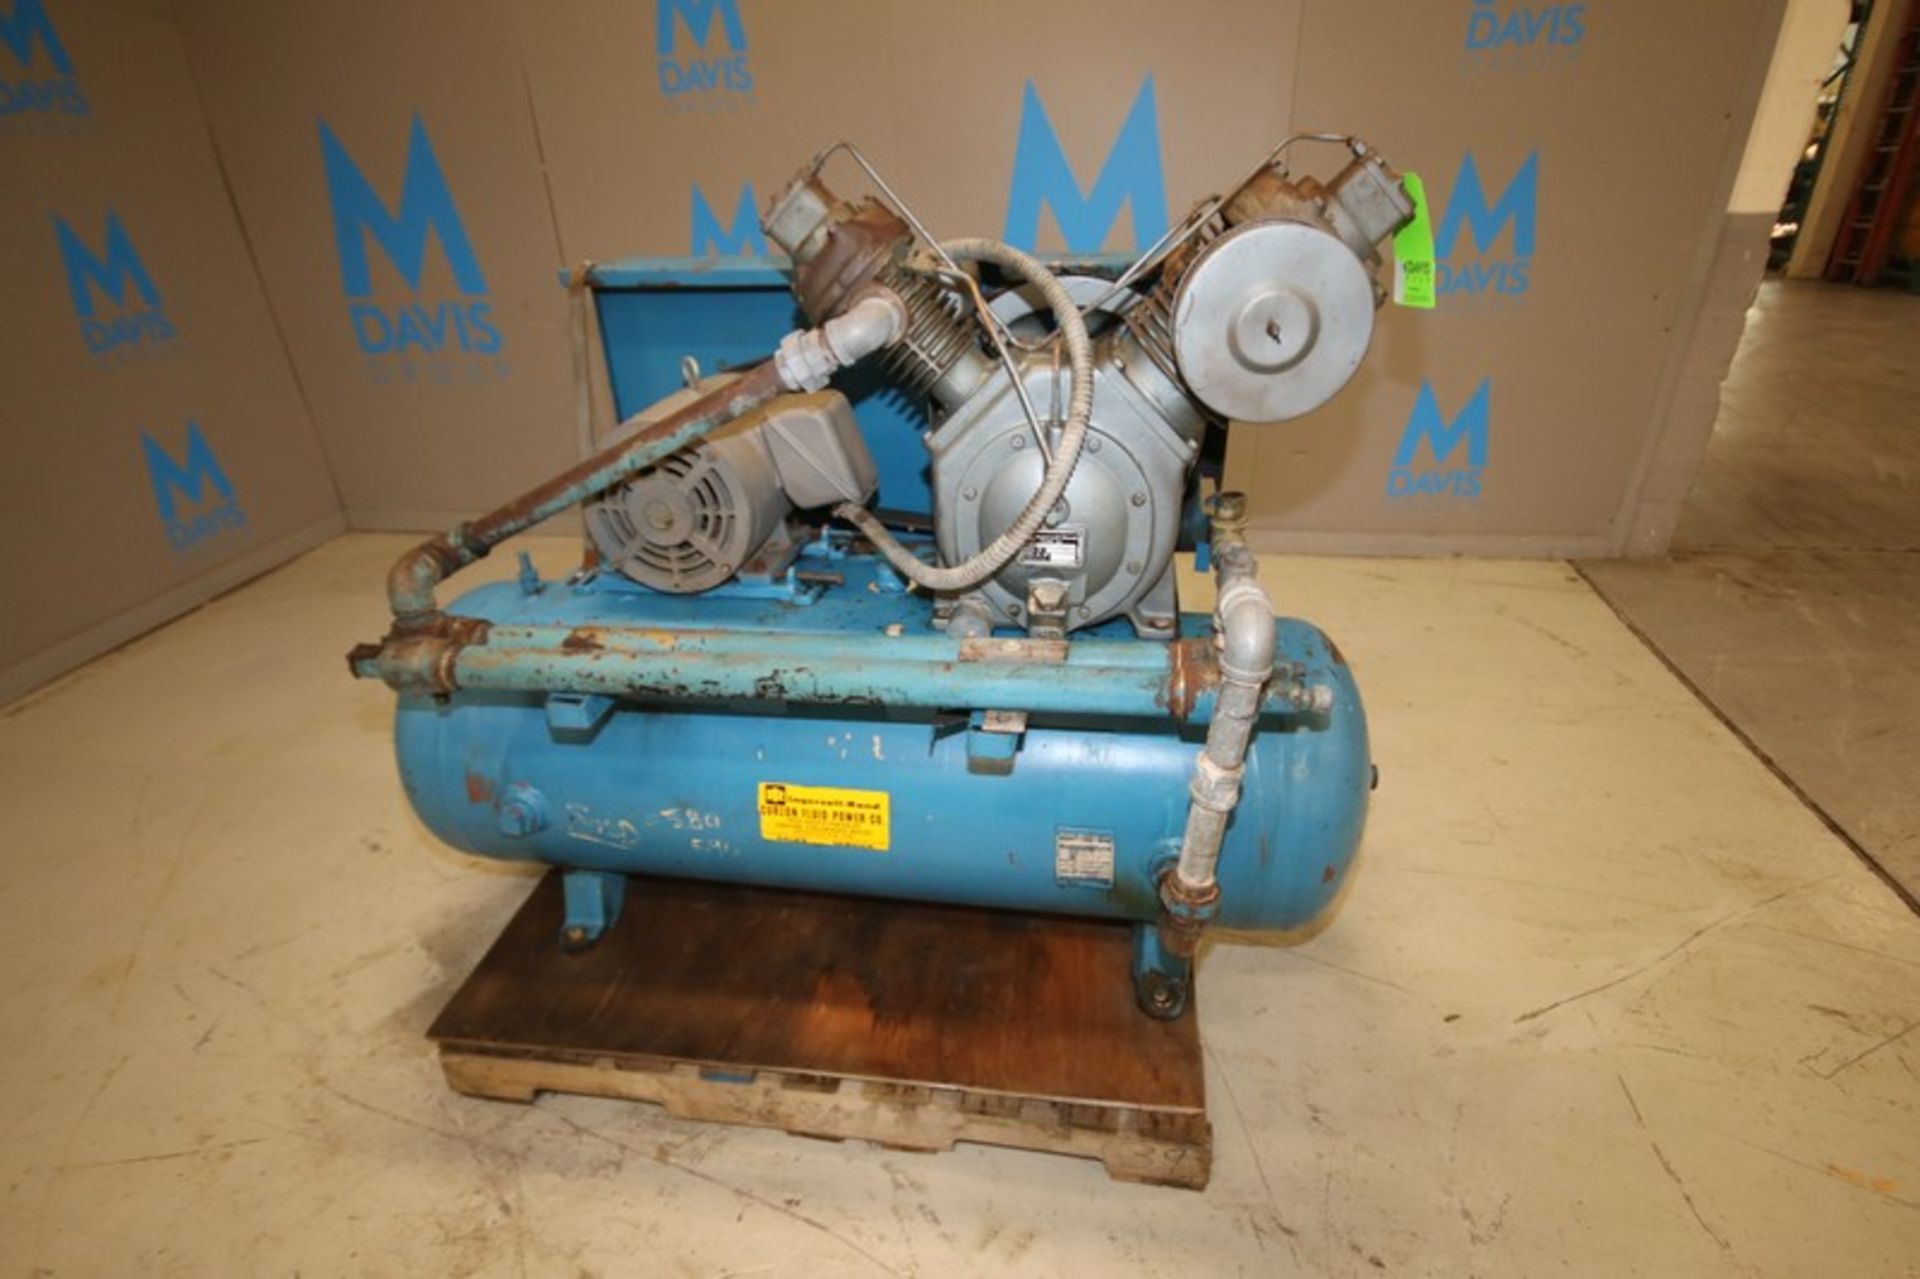 Ingersoll Rand 10 hp Reciprocating Air Compressor,Model 71T4, SN 276537, 1740 rpm, 230/460V, Mounted